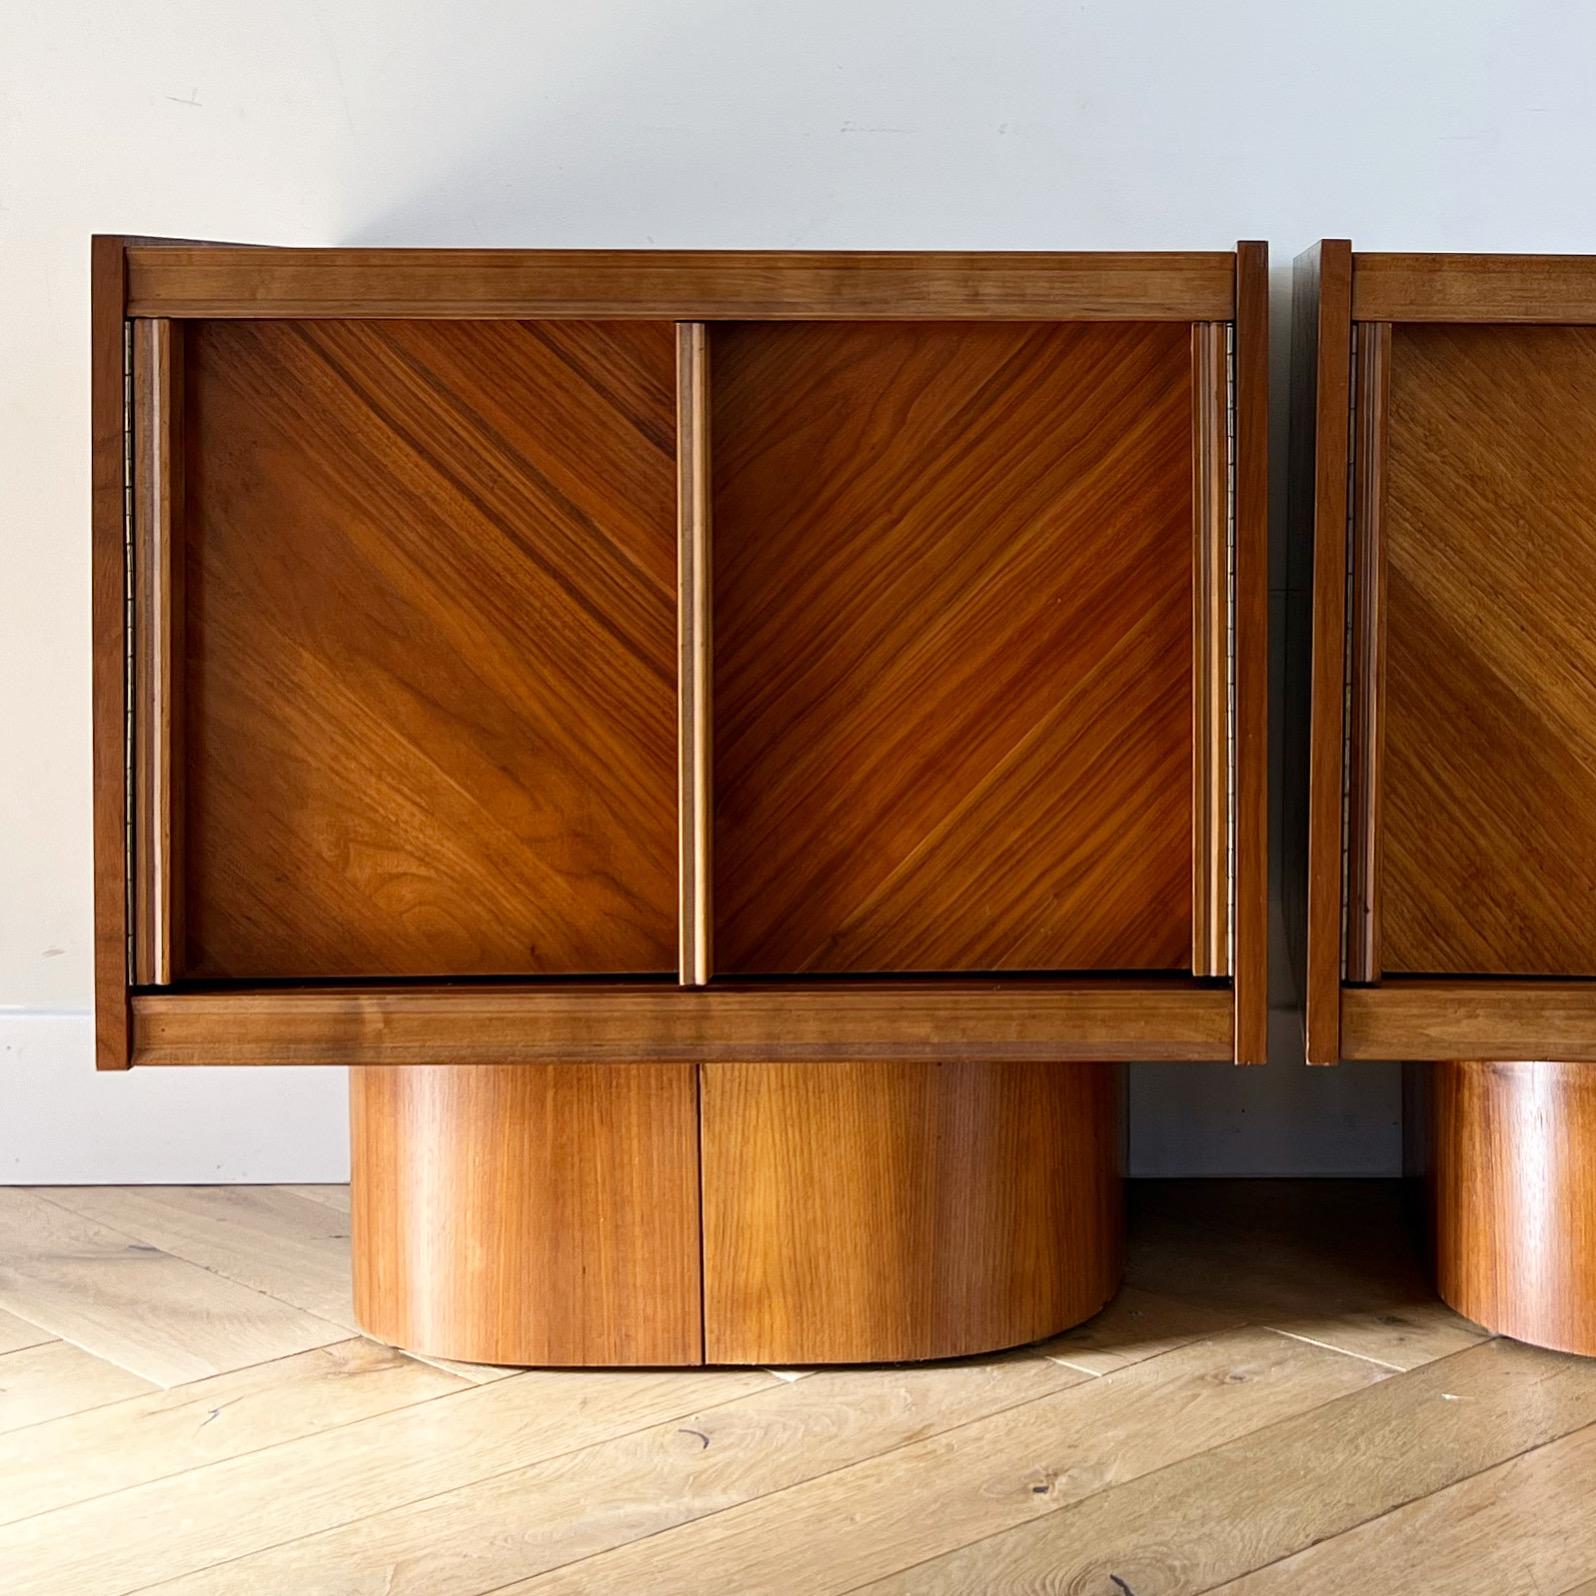 A stunning pair of mid century modern / brutalist nightstands in teak by Tabago, 1960s. Made in Canada. Bentwood curved bases uphold rectangular upper portions showcasing an exquisite wood grain and unique artisanal details. The highly geometric